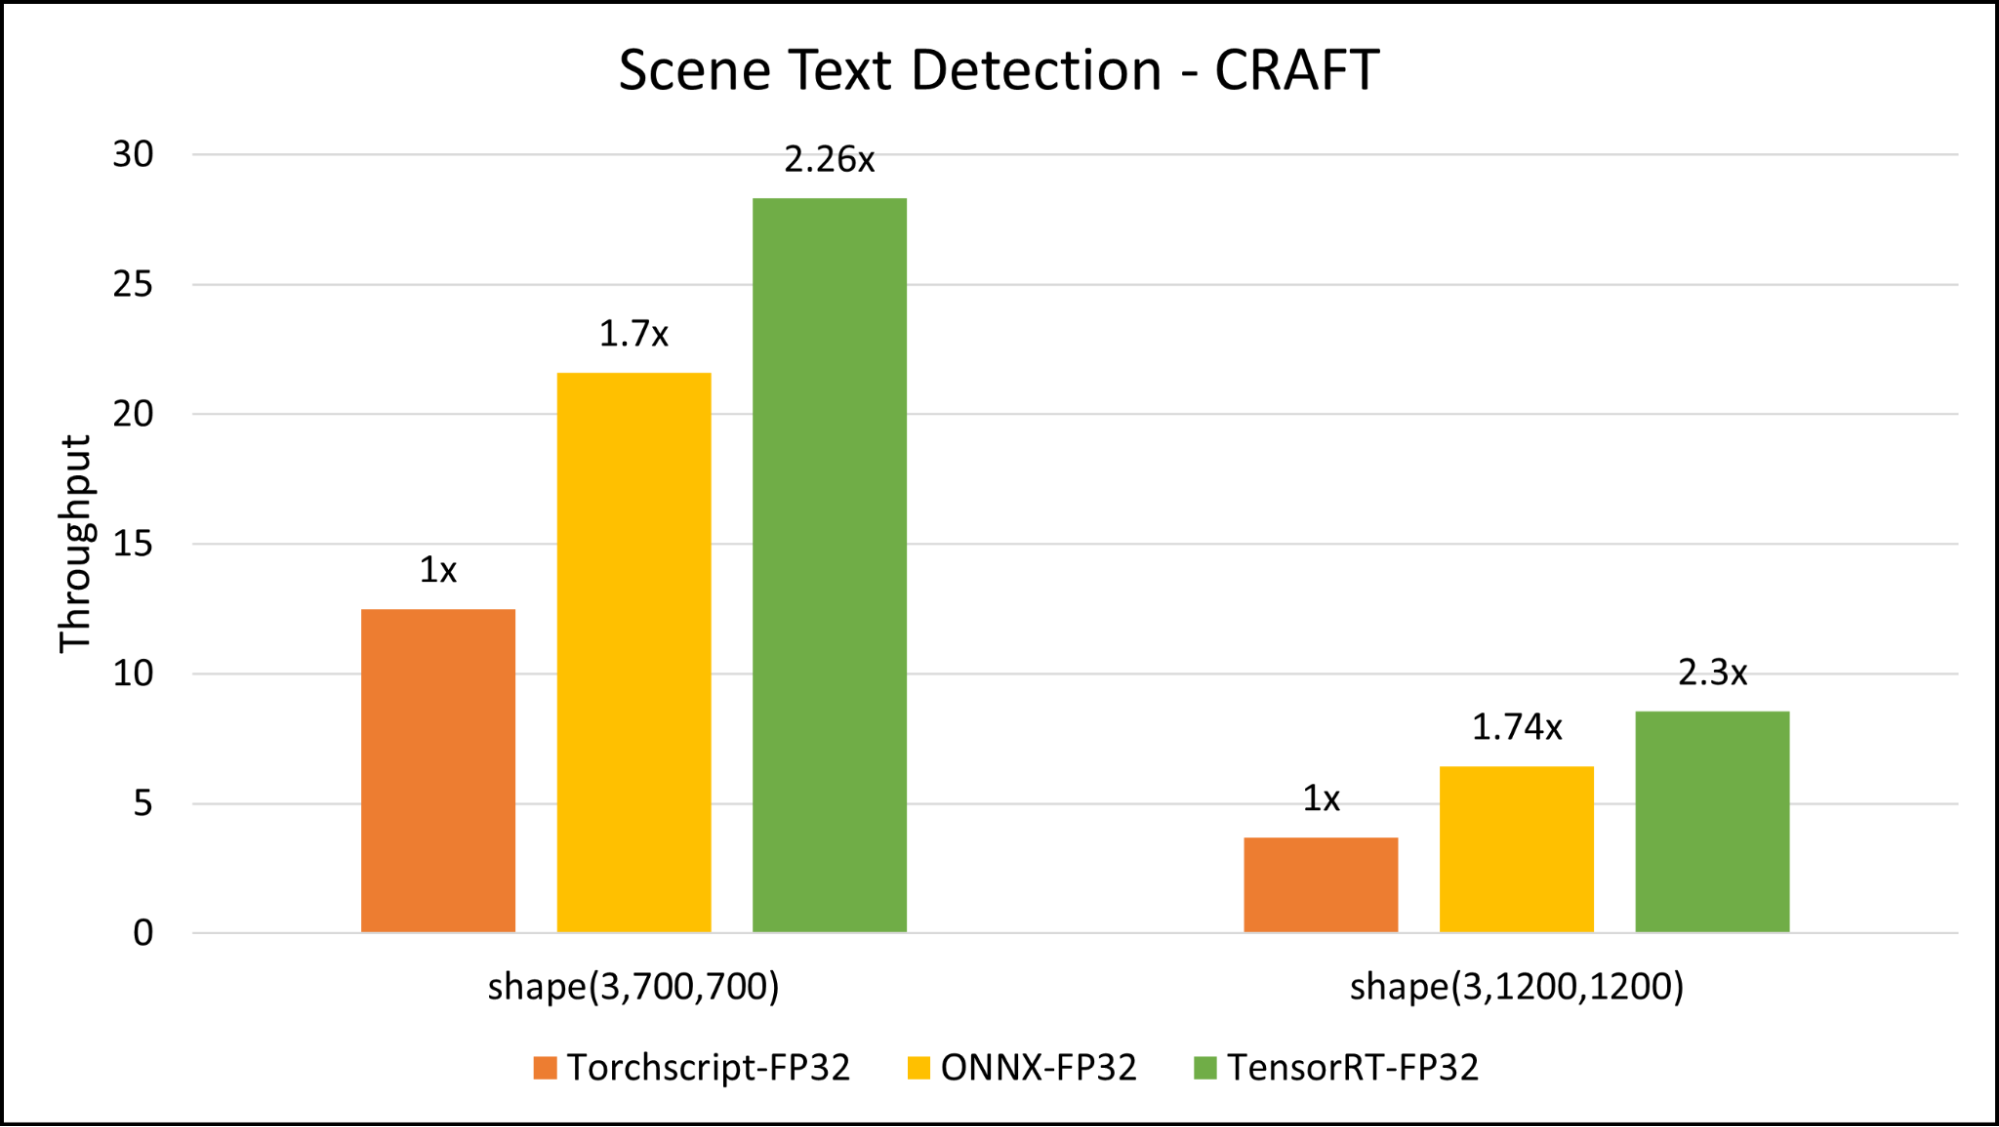 A graph comparing the performance of three modes of text detection model inference (on an NVIDIA A5000 mobile GPU) using Triton Server: PyTorchScript, ONNX with CUDA and TensorRT, tested on two image sizes (3,700,700 and 3,1200,1200).